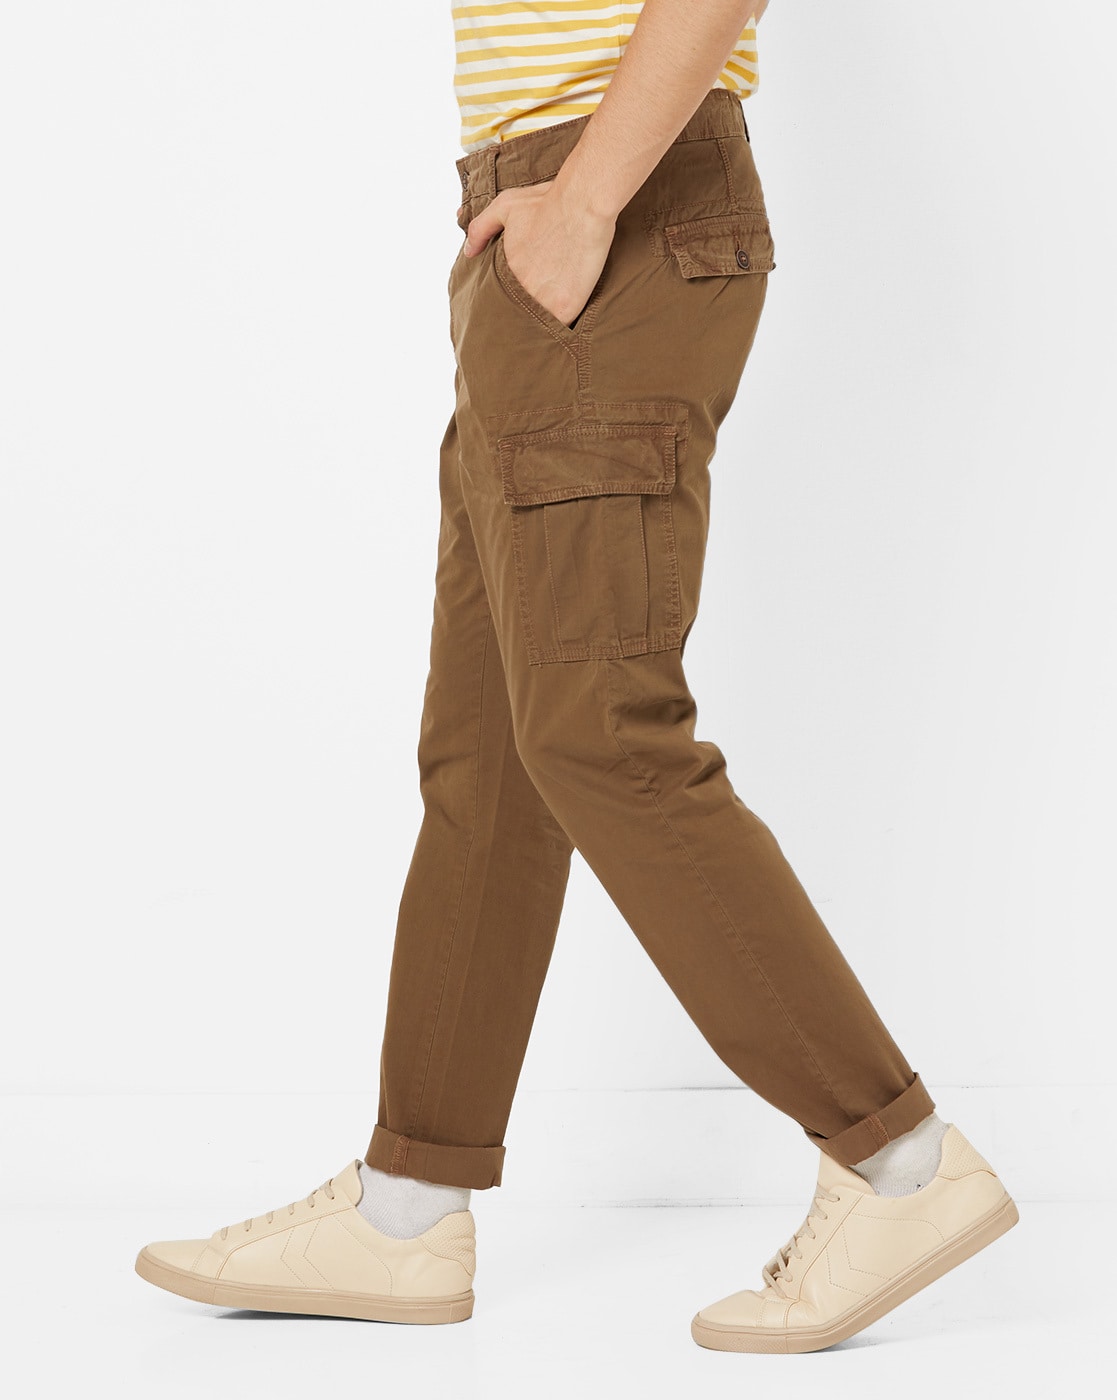 Buy Olive Trousers & Pants for Men by CROCODILE Online | Ajio.com